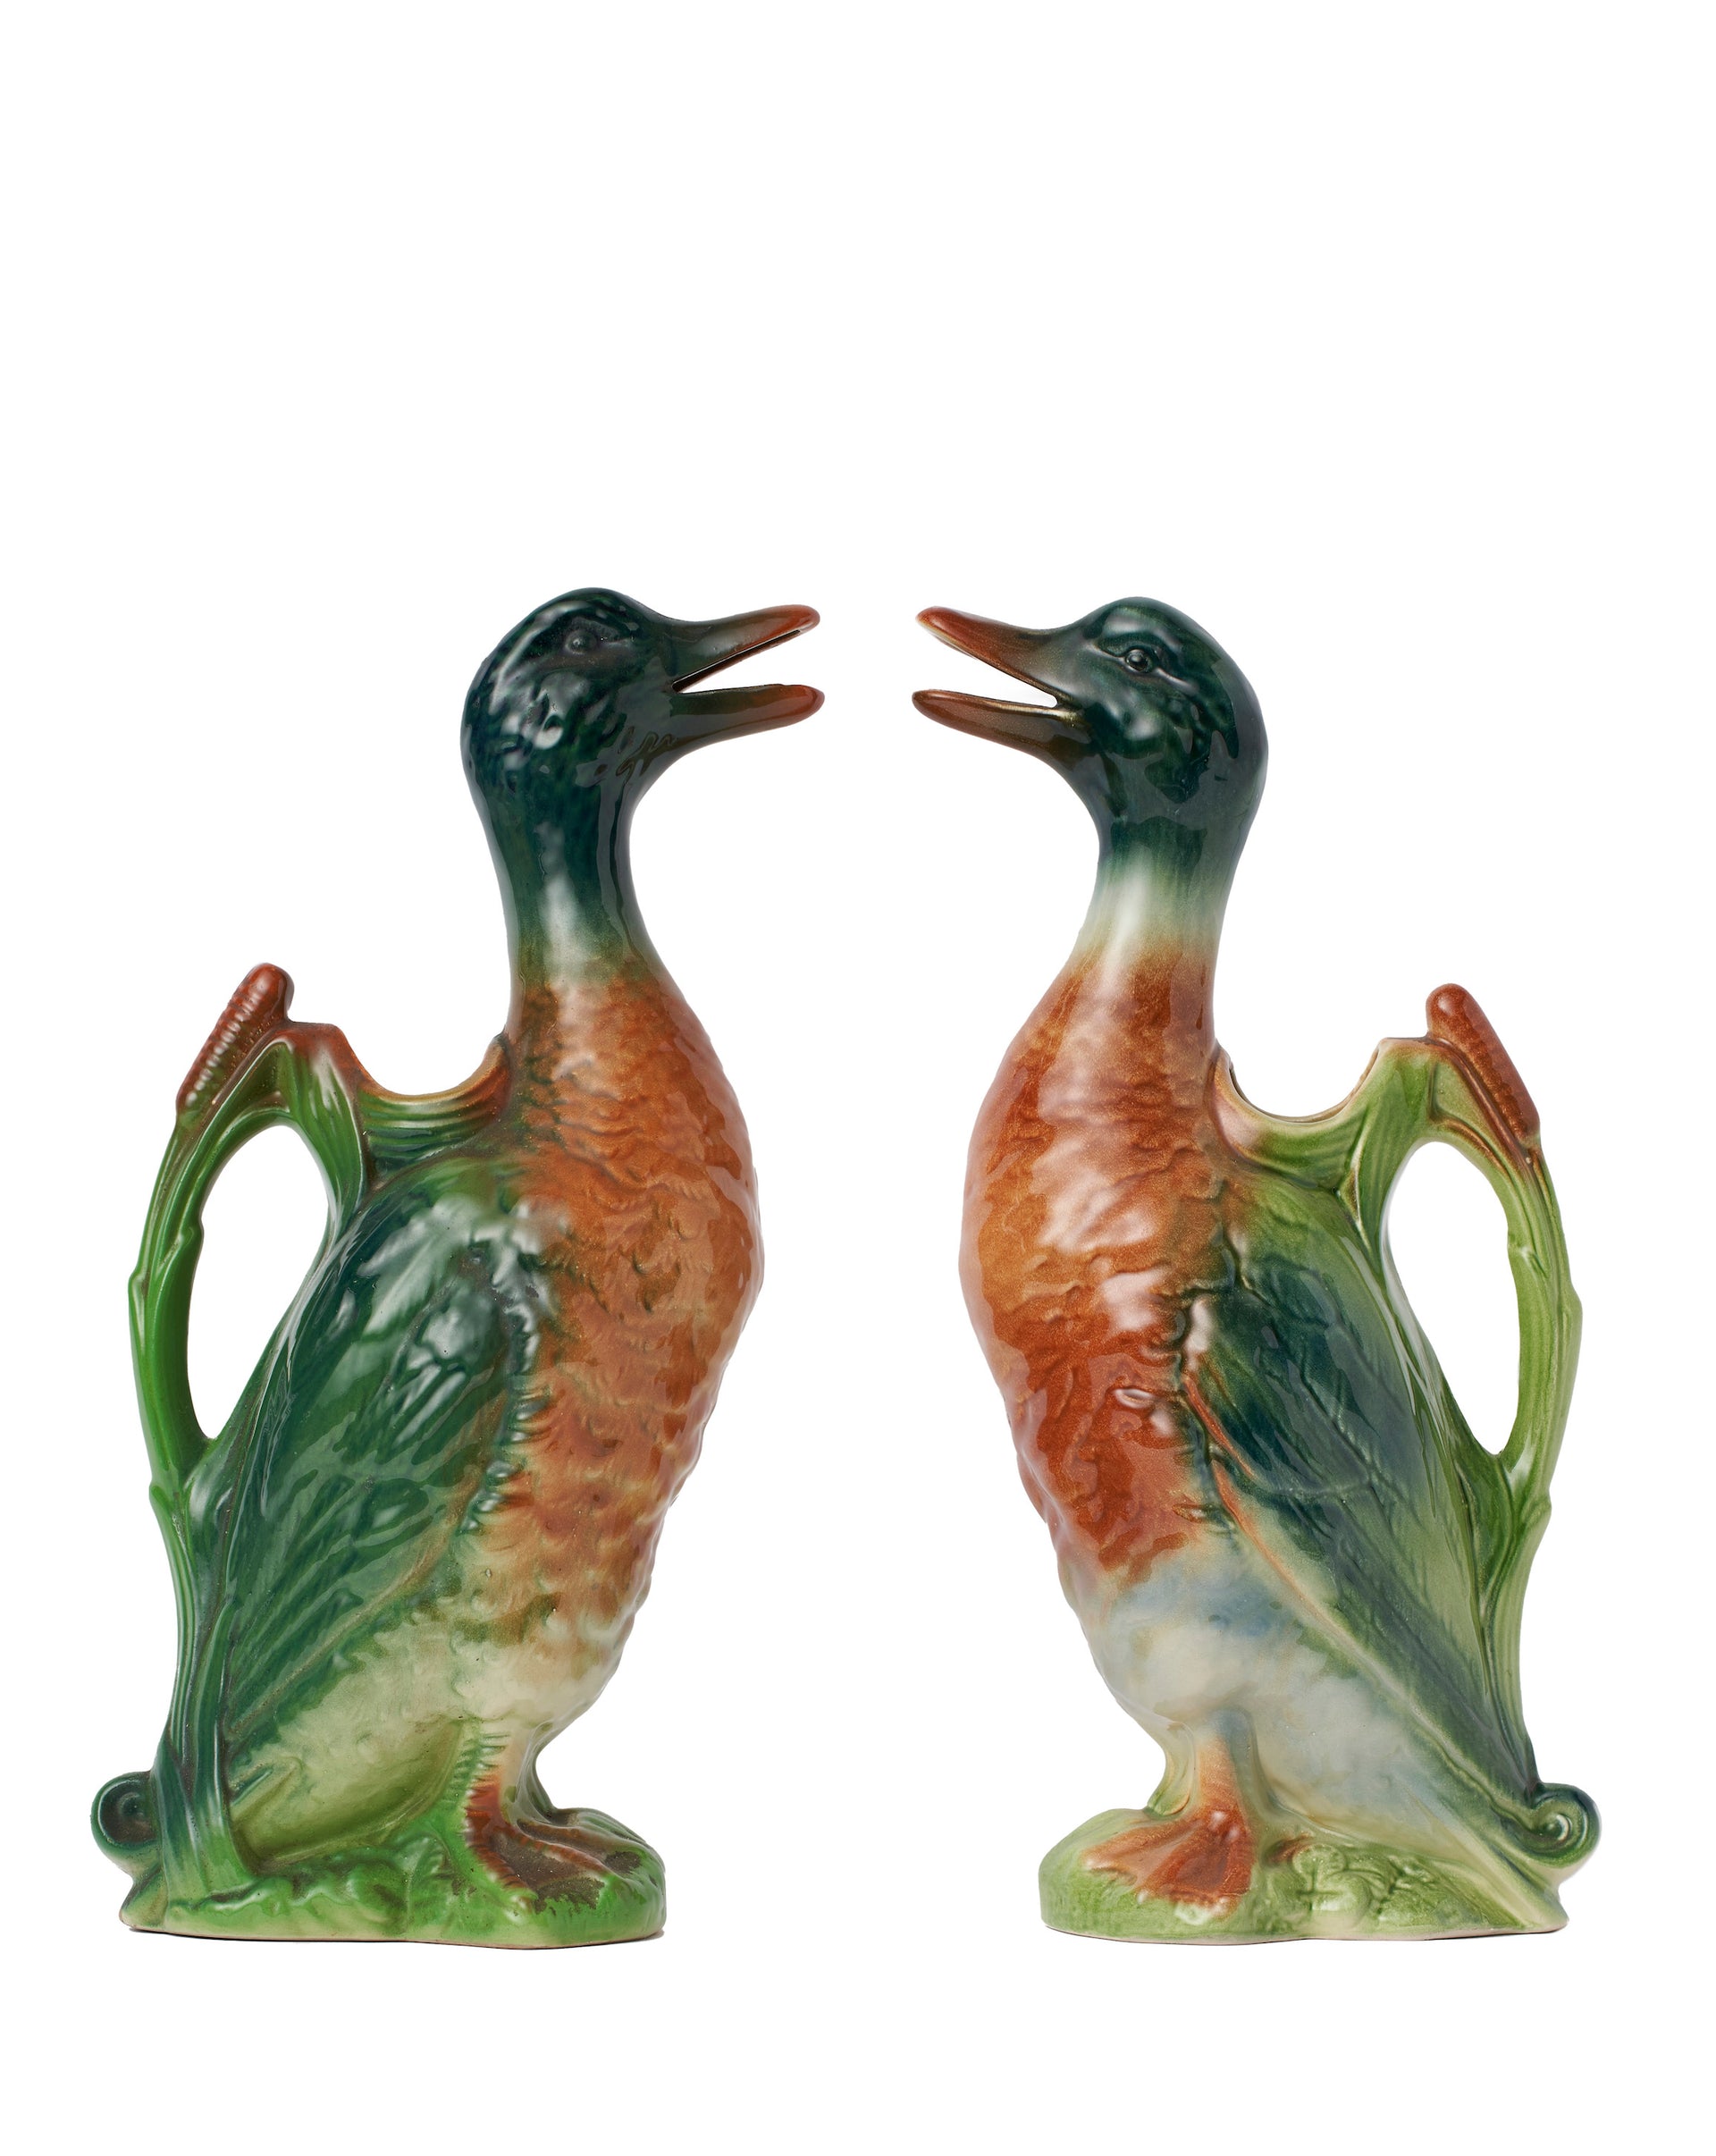 SOLD A matched pair of duck form faience pitchers, French Circa 1930